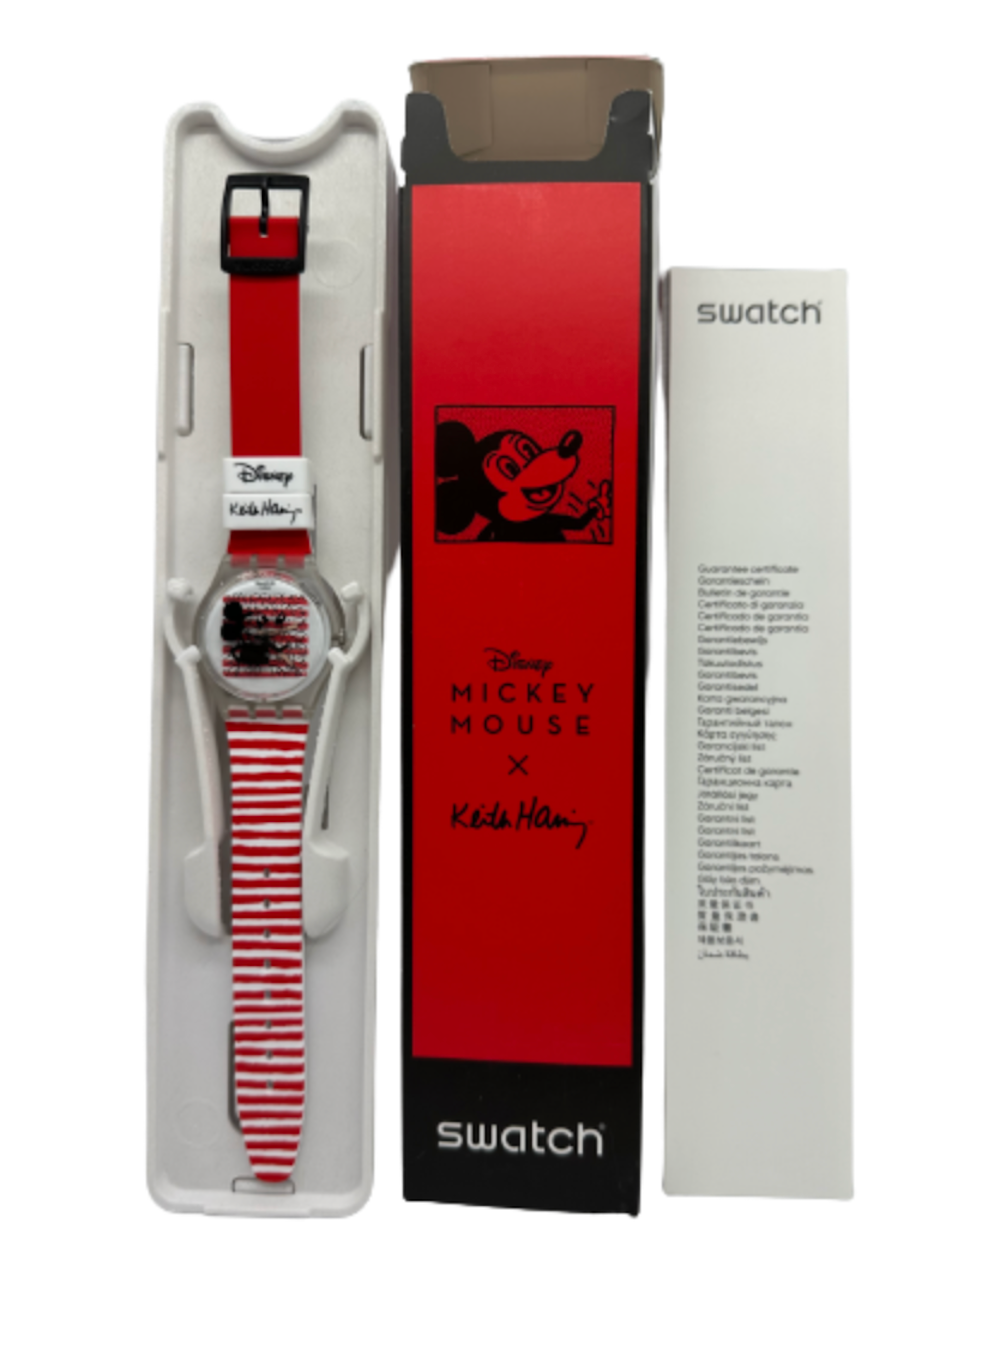 Swatch Disney Keith Haring Mariniere Mickey Watch Limited Edition New with Box